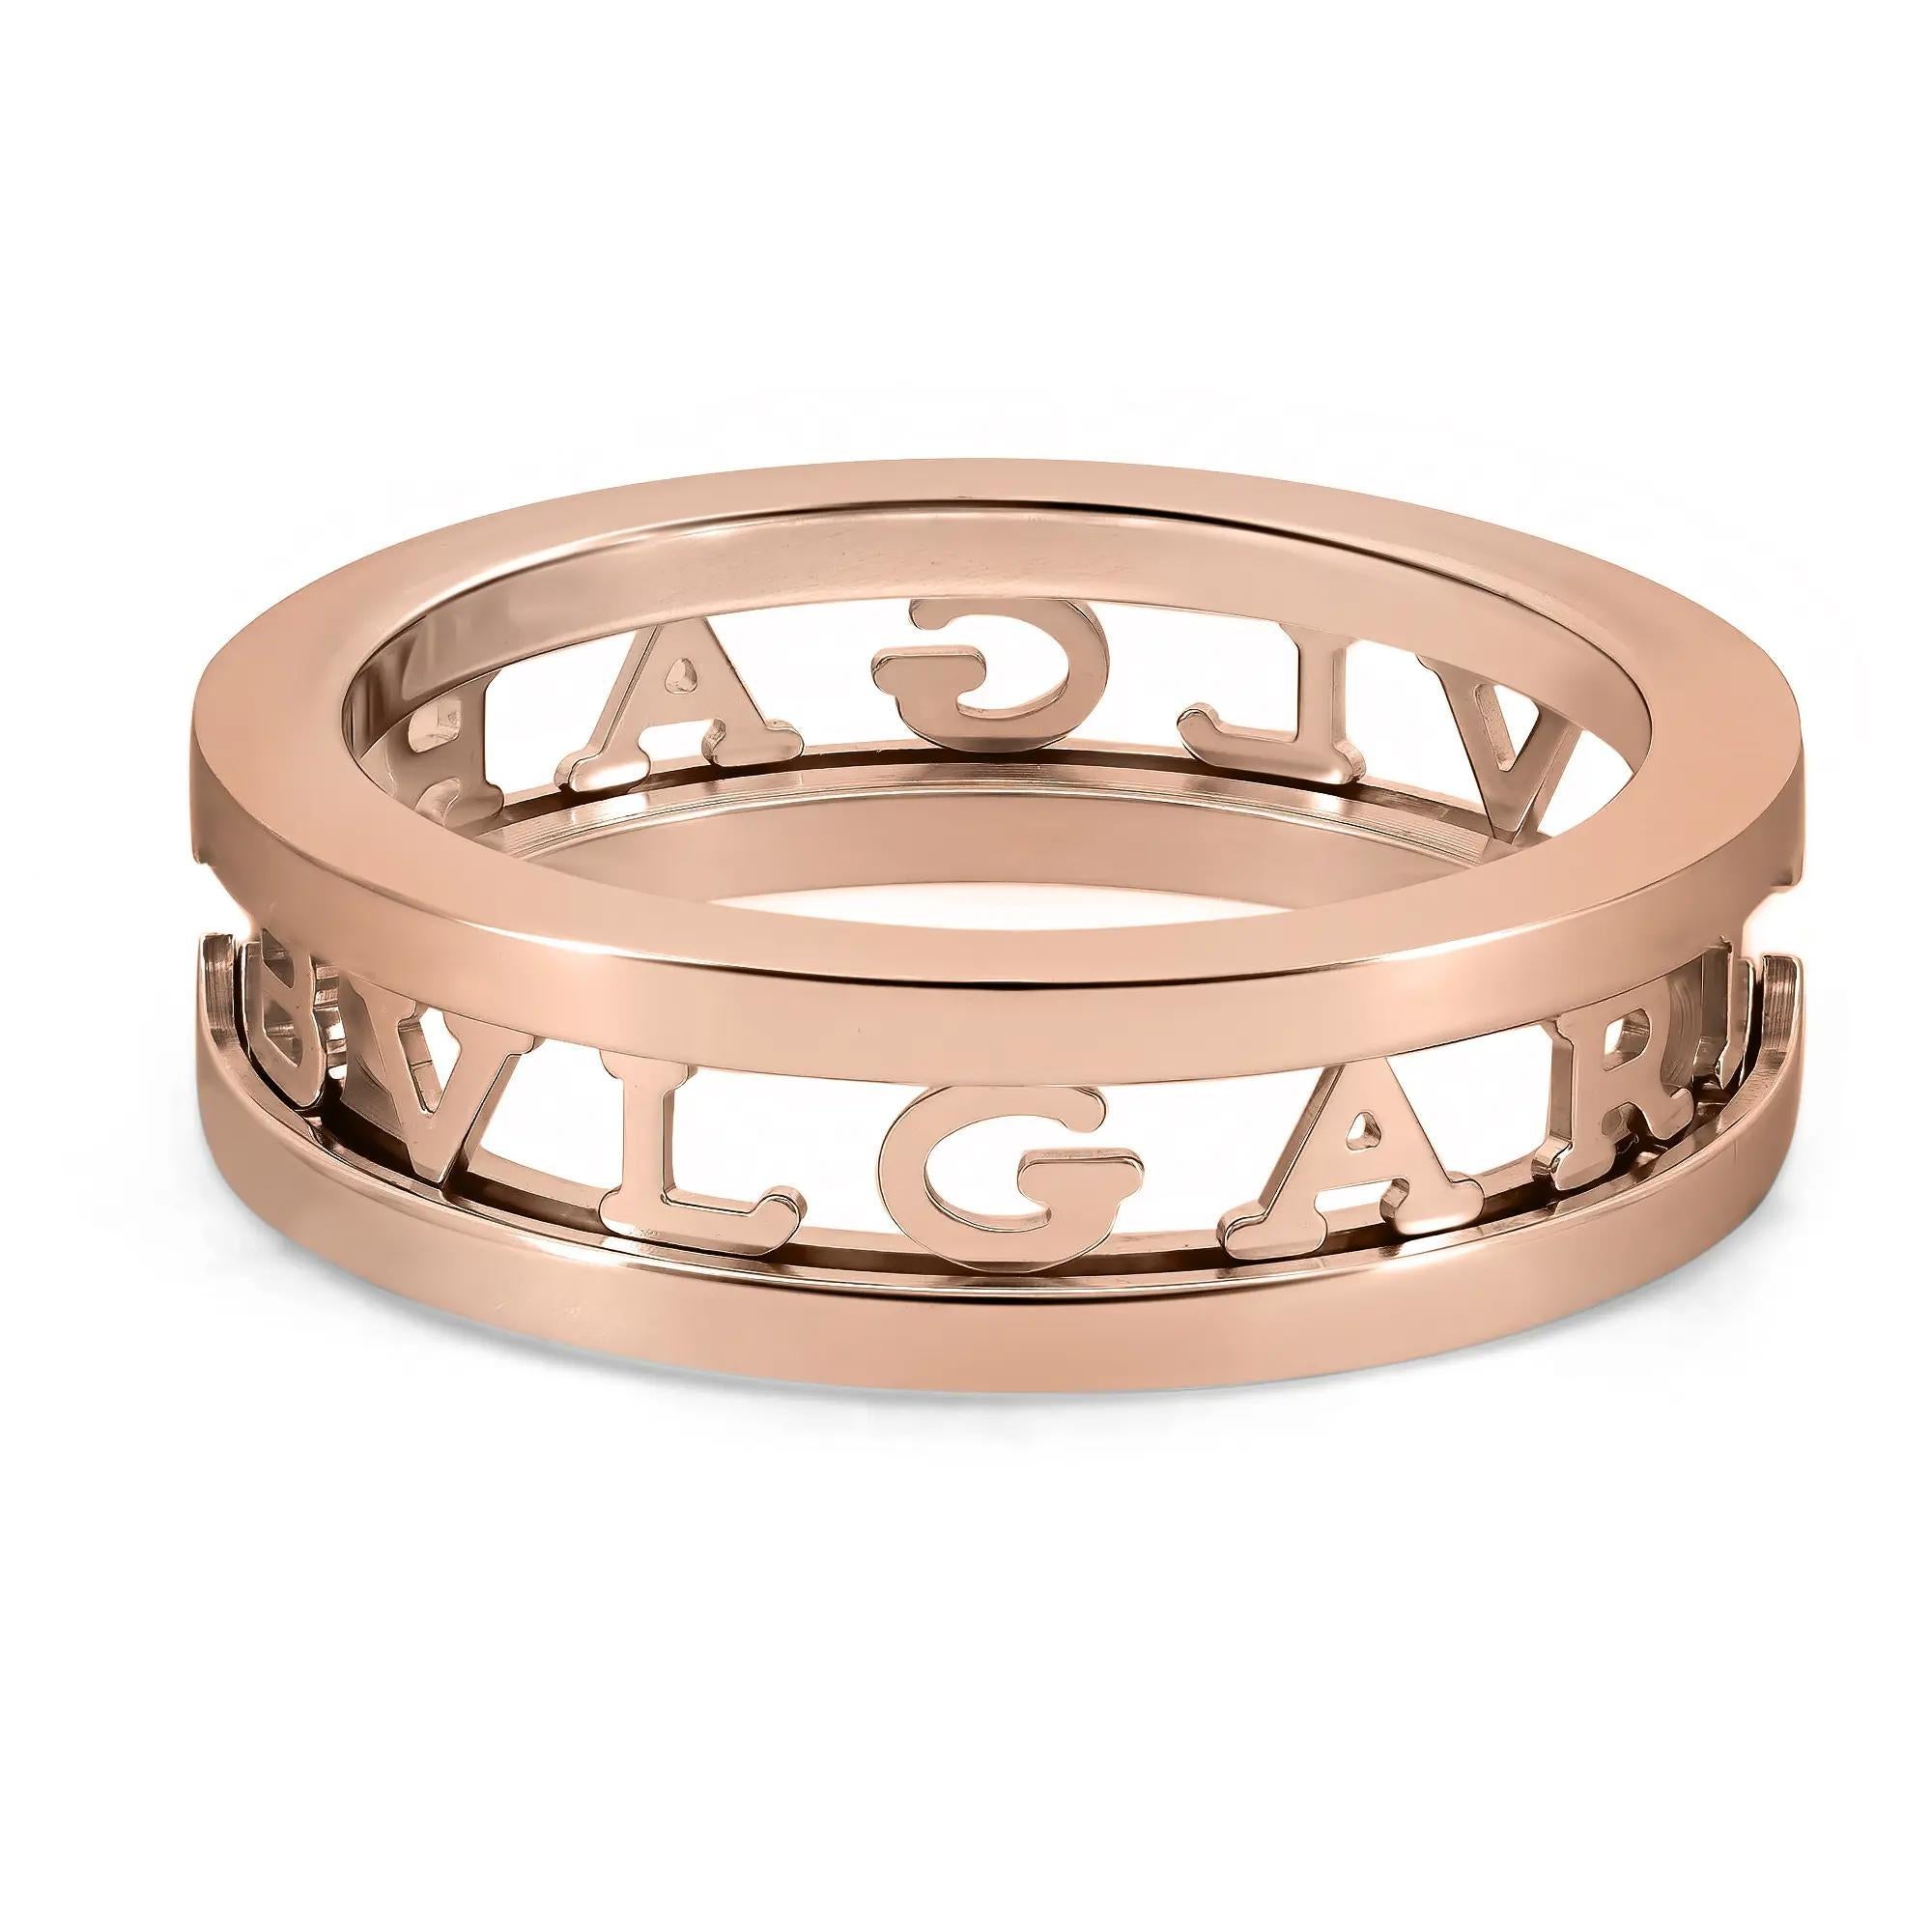 Fabulous and chic, this Bvlgari B.Zero1 band ring is a ground-breaking statement of Bulgari’s creative vision. Crafted in lustrous 18K rose gold. It features the iconic BVLGARI logo as a bold element of design in a one-band openwork spiral ring.